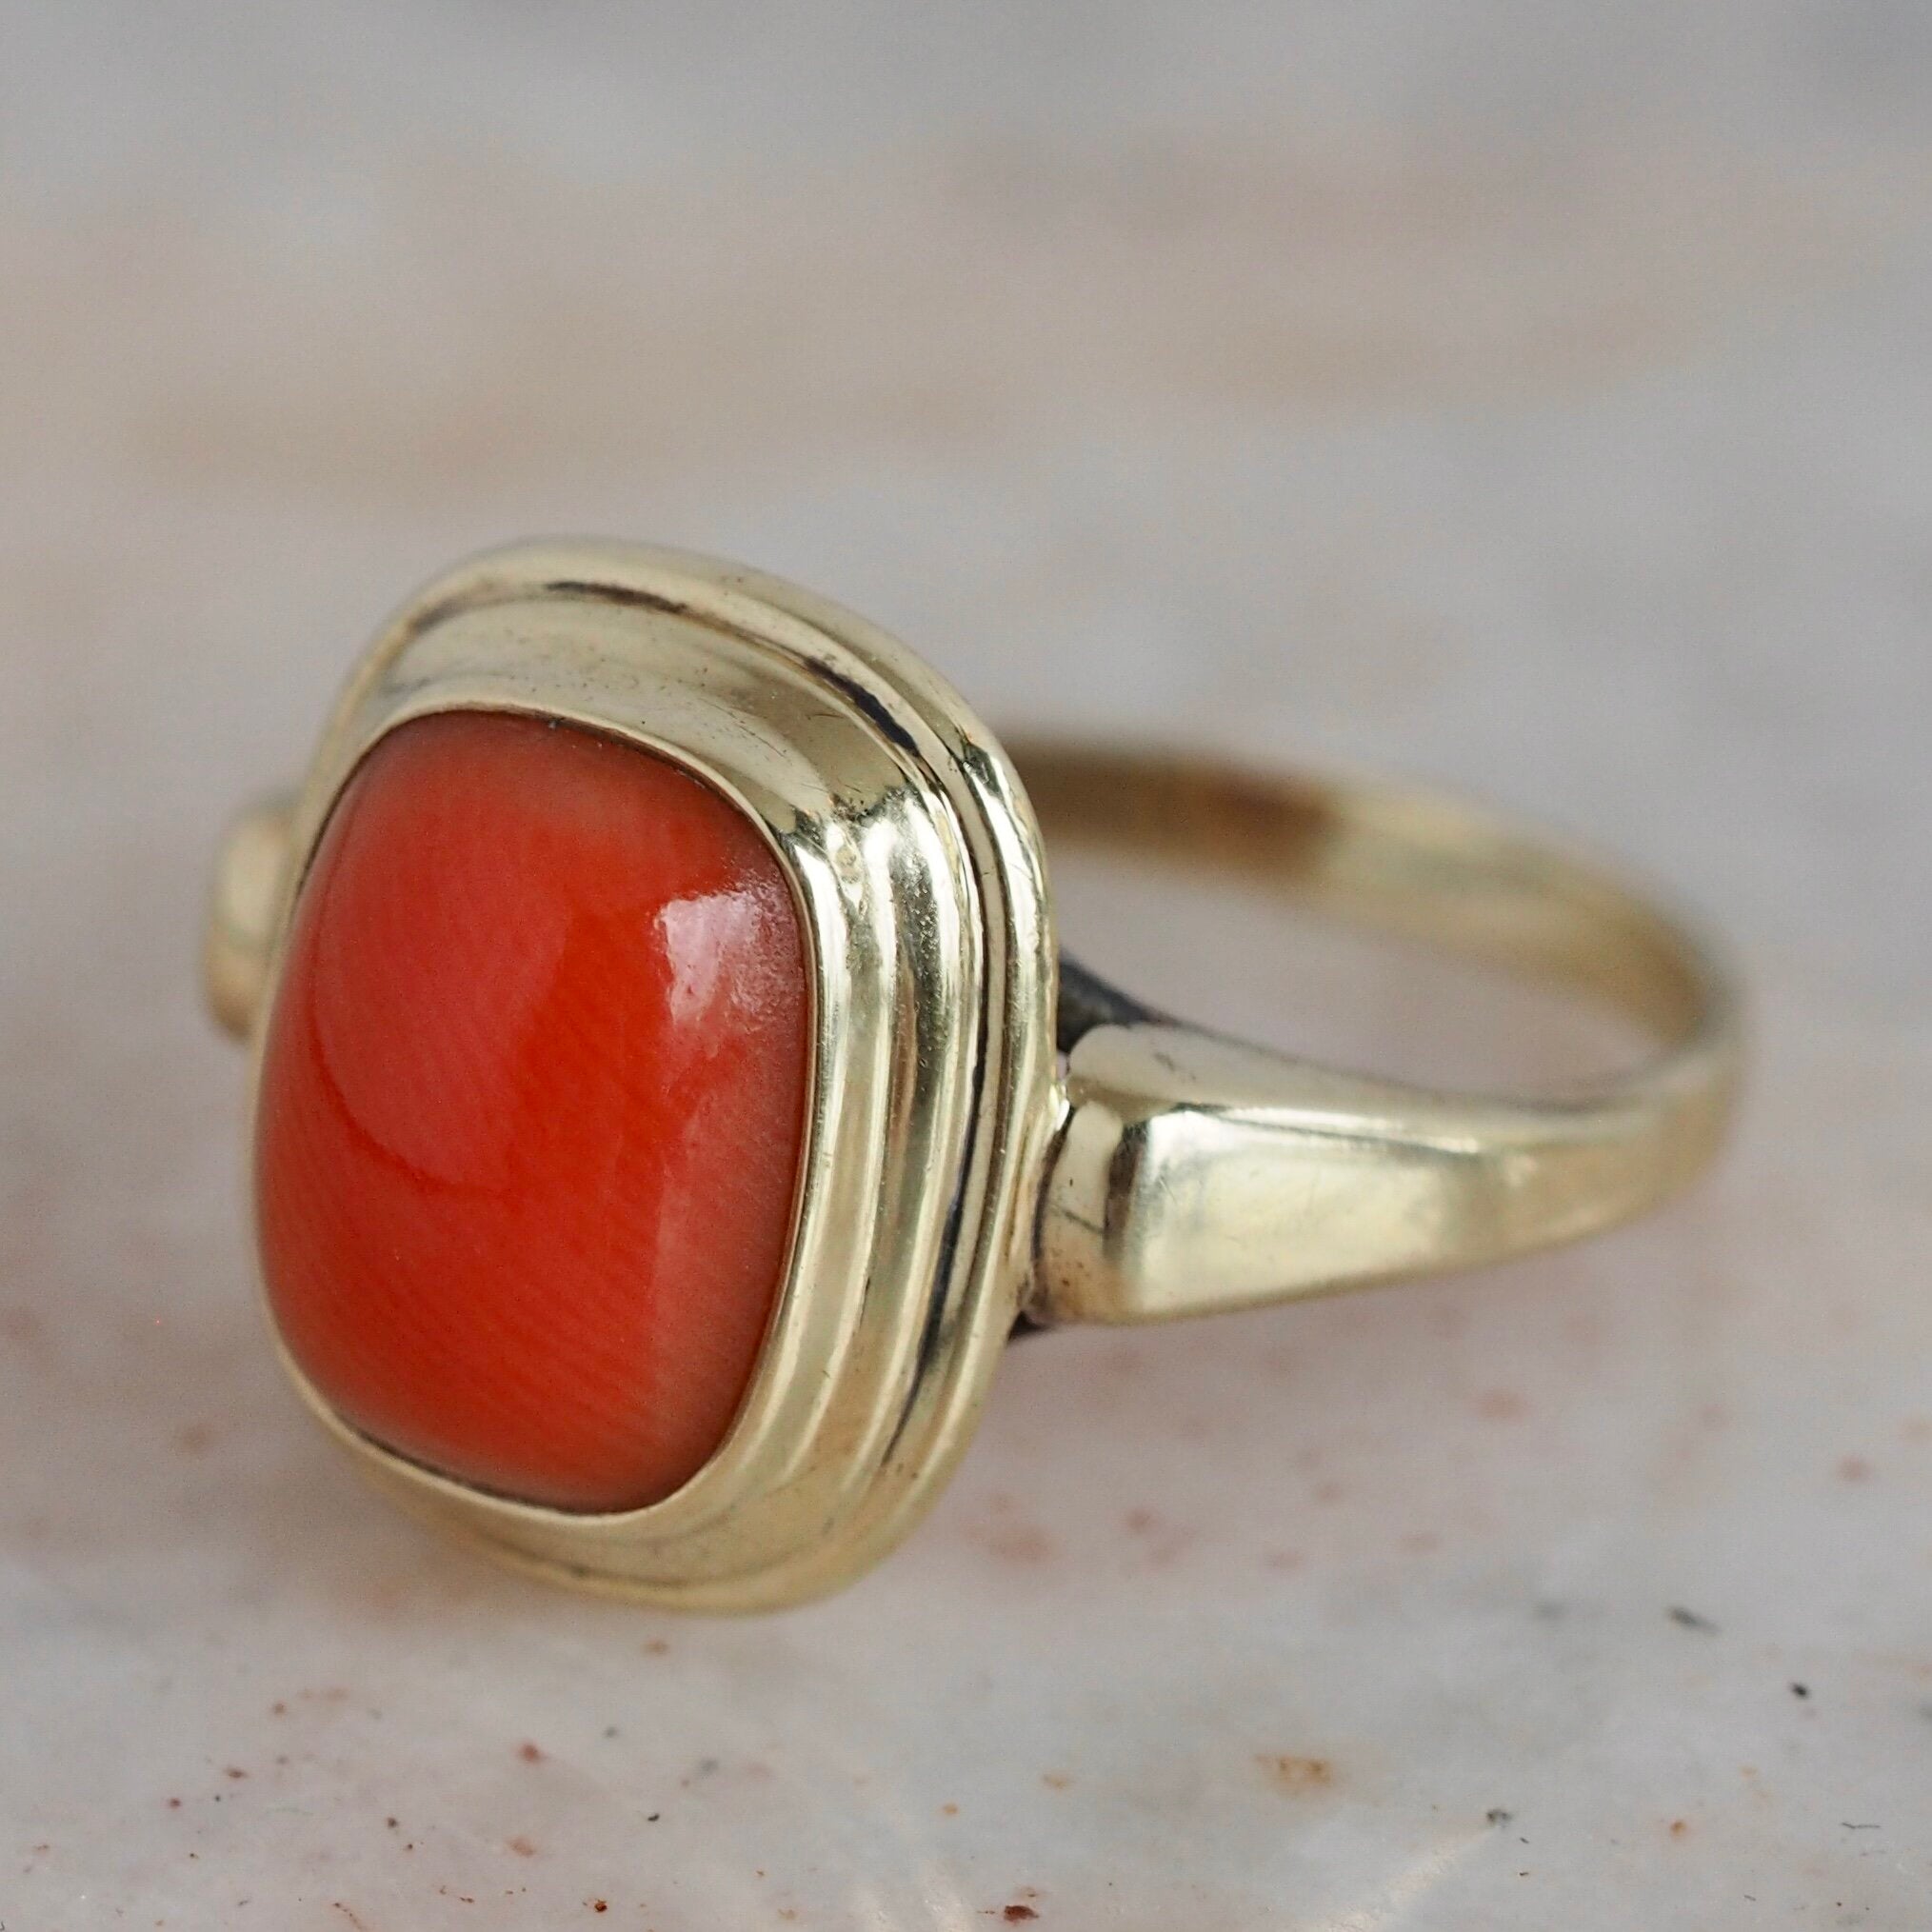 Natural Red Onyx Gemstone with Gold Plated 925 Sterling Silver Men's Ring  #5861 | eBay